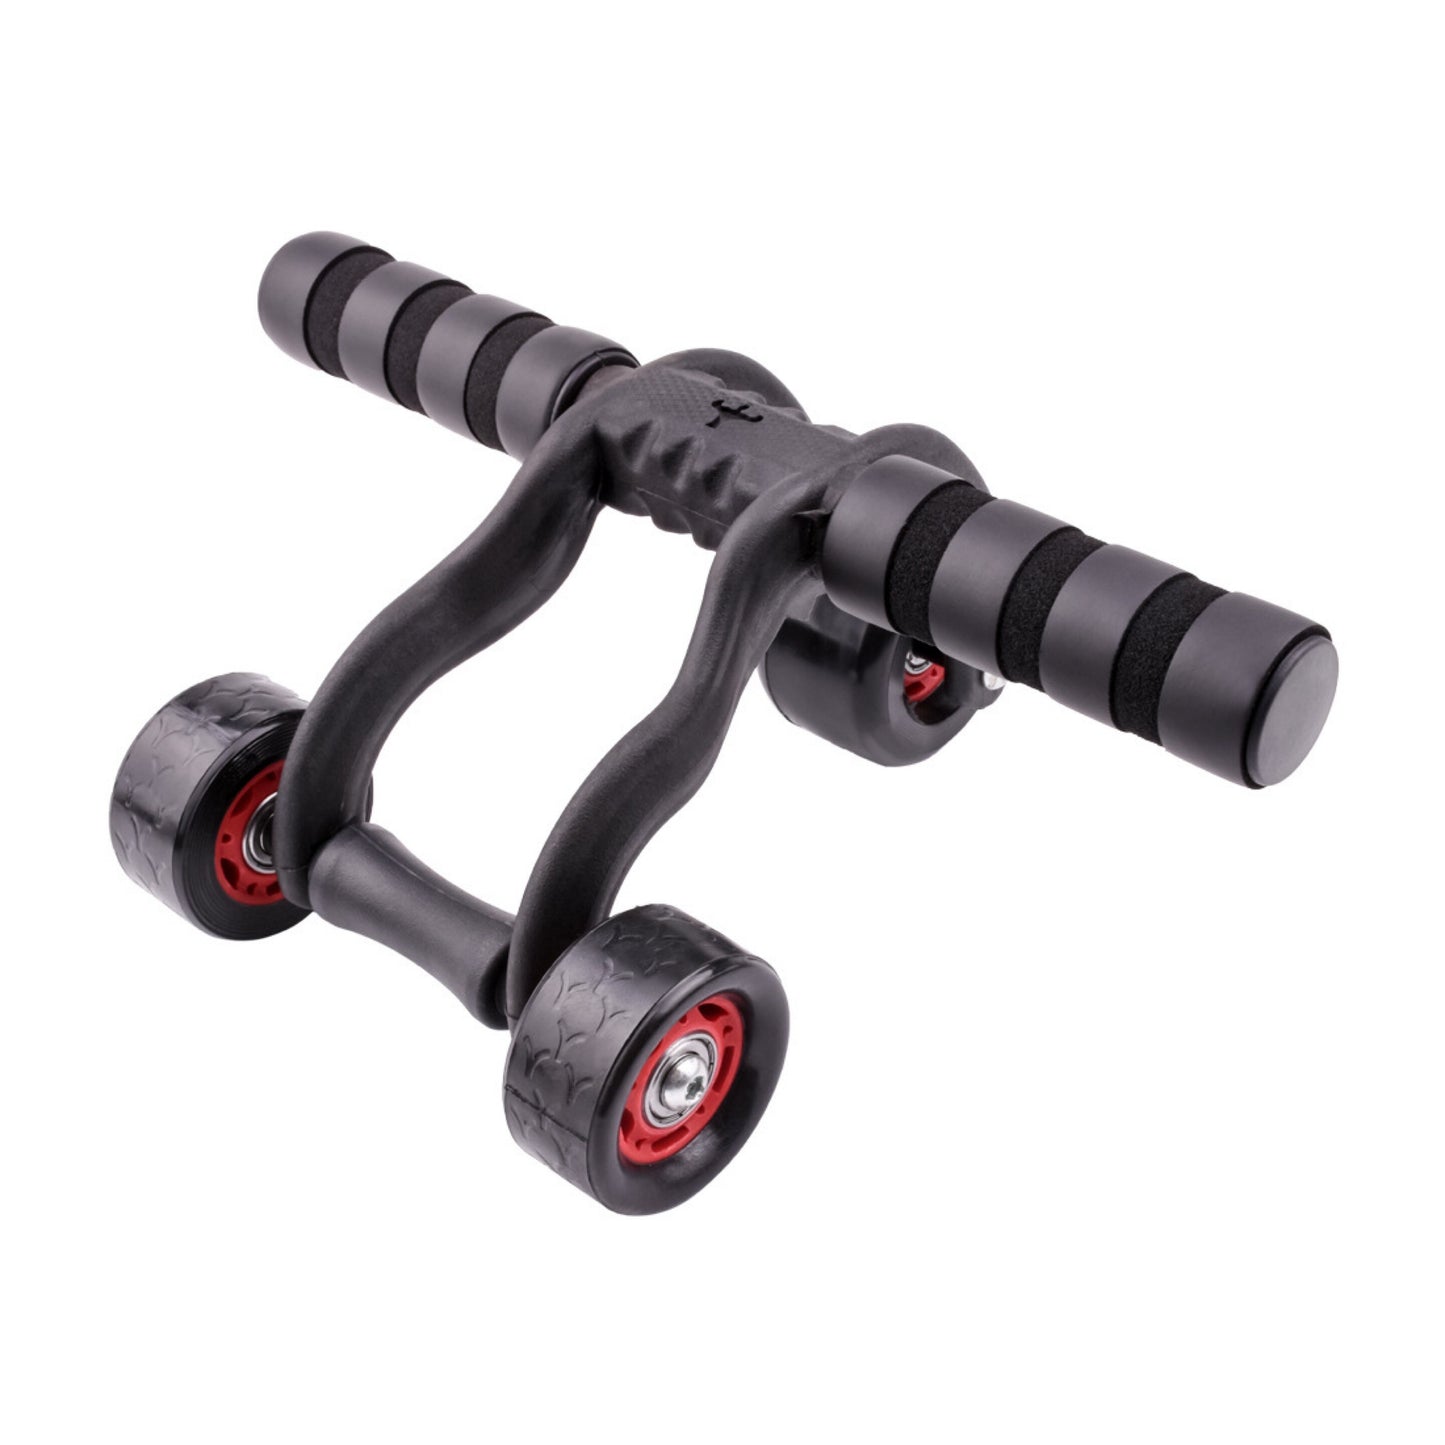 Multifunctional Four Abdominal Wheel Abdominalhome Exercise Weight Loss Abdomen Wheel Mute Fitness Exerciser Ab Roller Wheel 